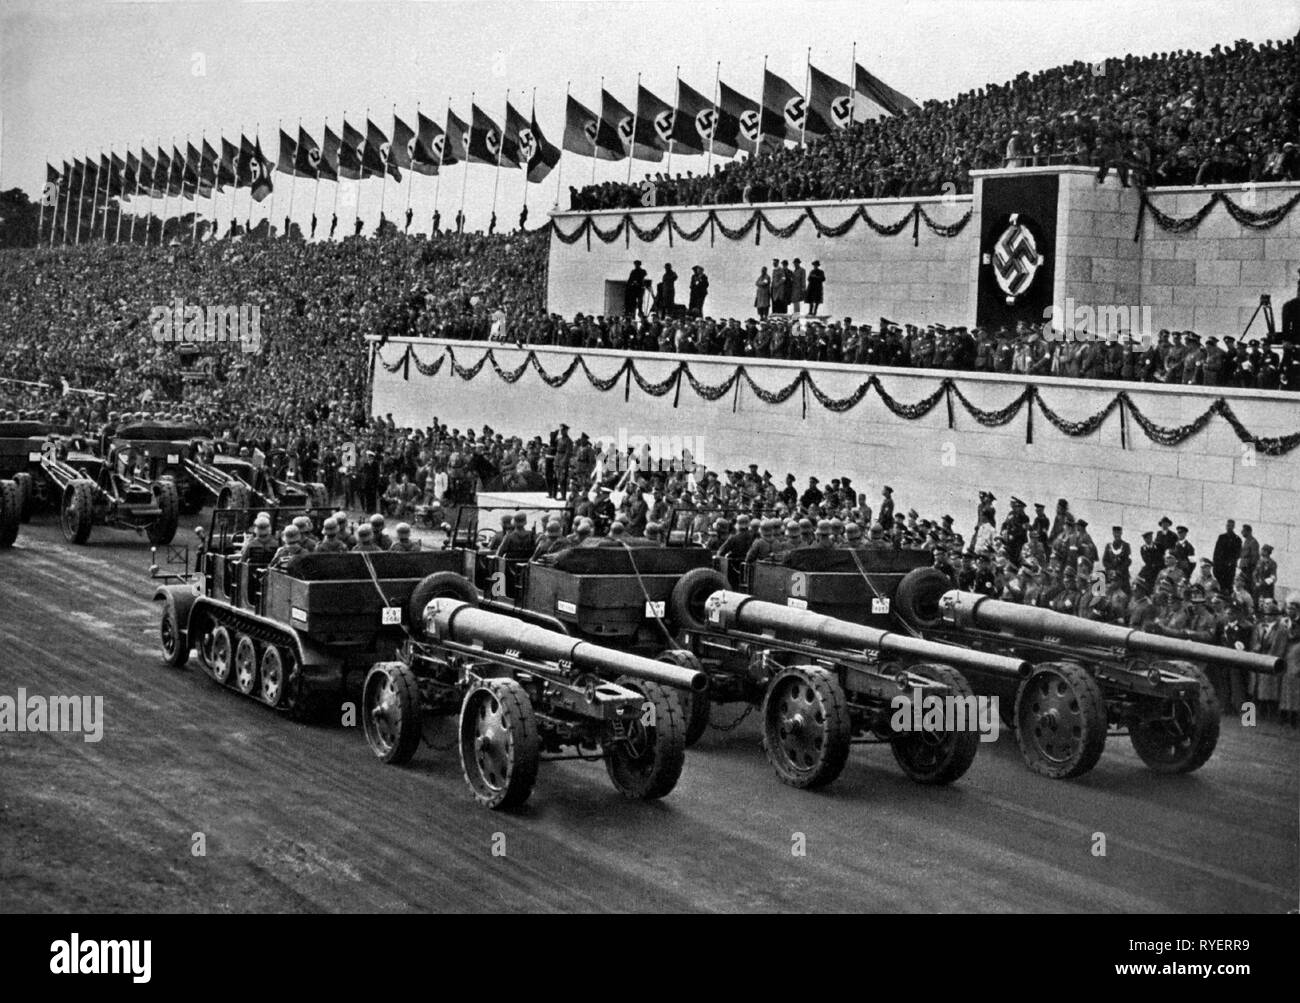 National Socialism, Nuremberg Rally, 'Reichsparteitag der Freiheit', Nuremberg 10.-16.9.1935, day of the Wehrmacht, march-past of heavy artillery at the stands, Additional-Rights-Clearance-Info-Not-Available Stock Photo